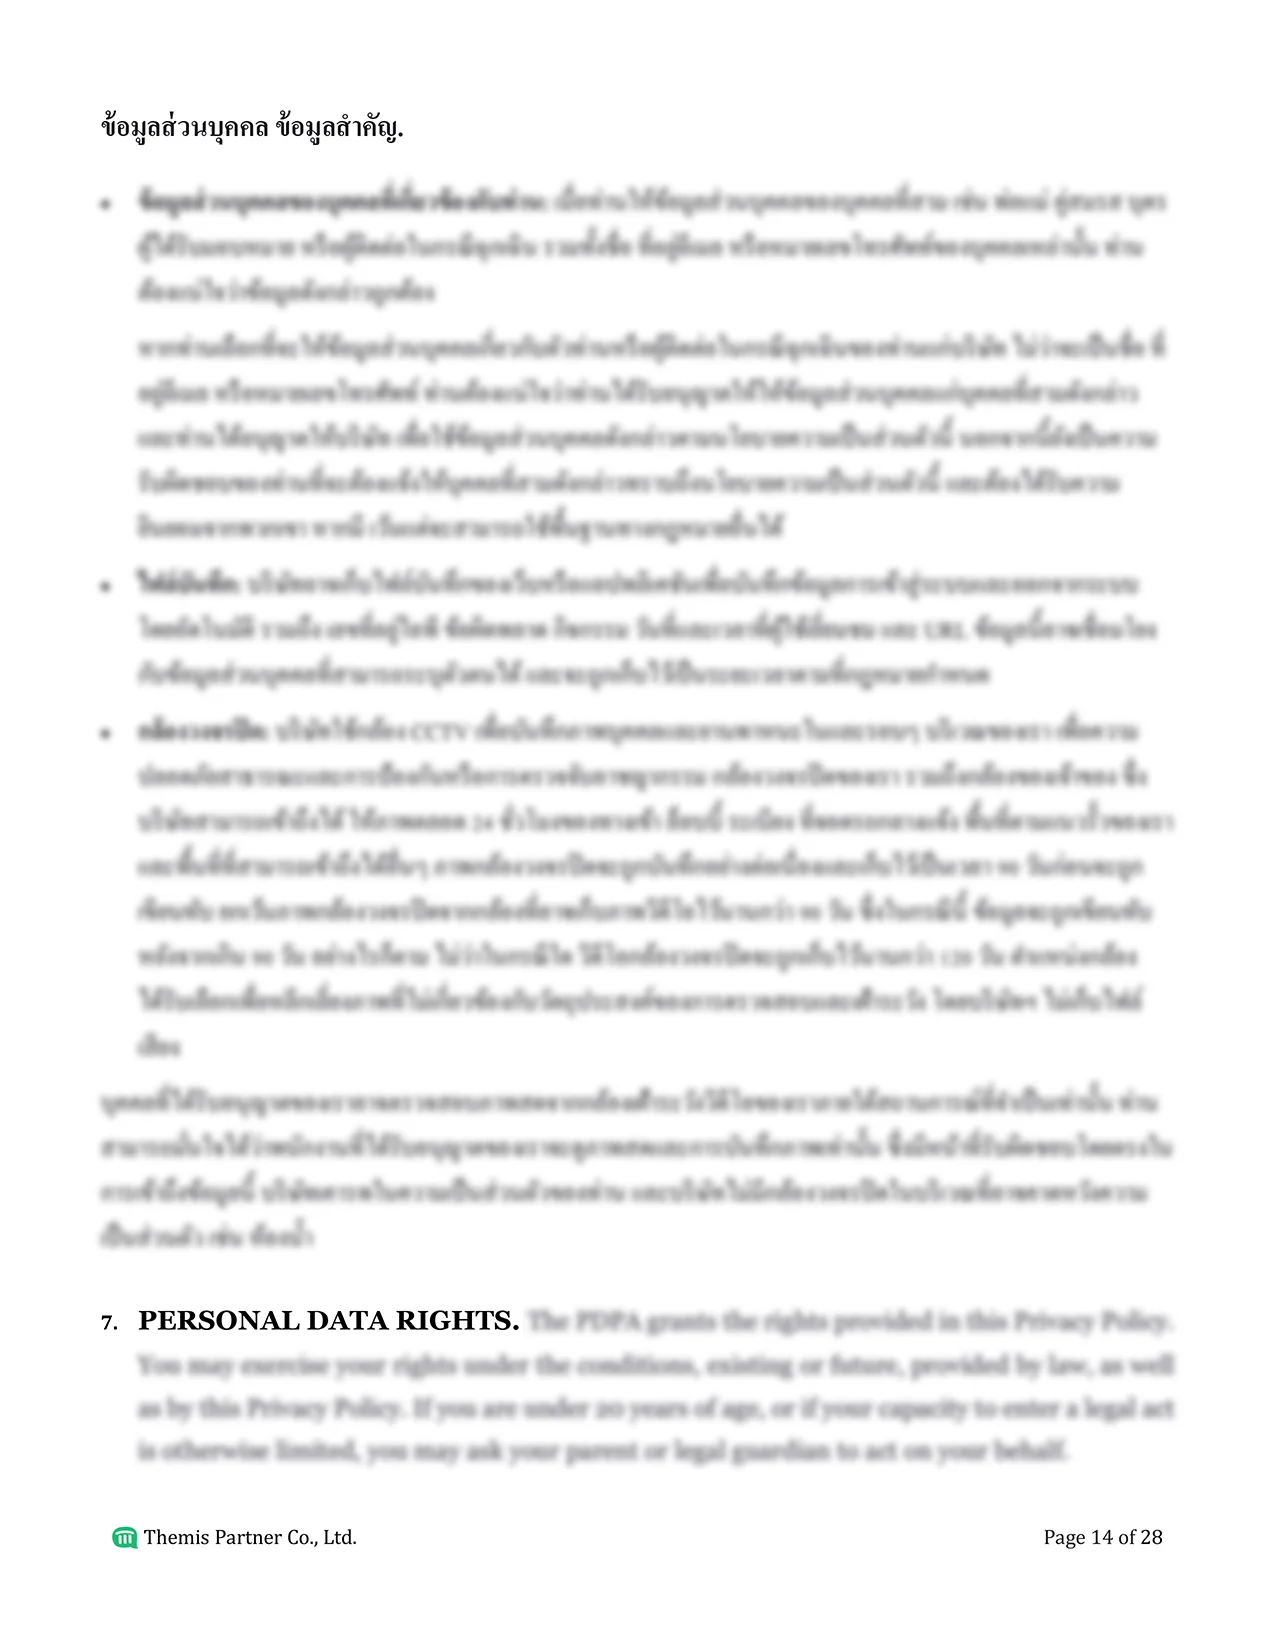 PDPA consent form and company policy Thailand 14